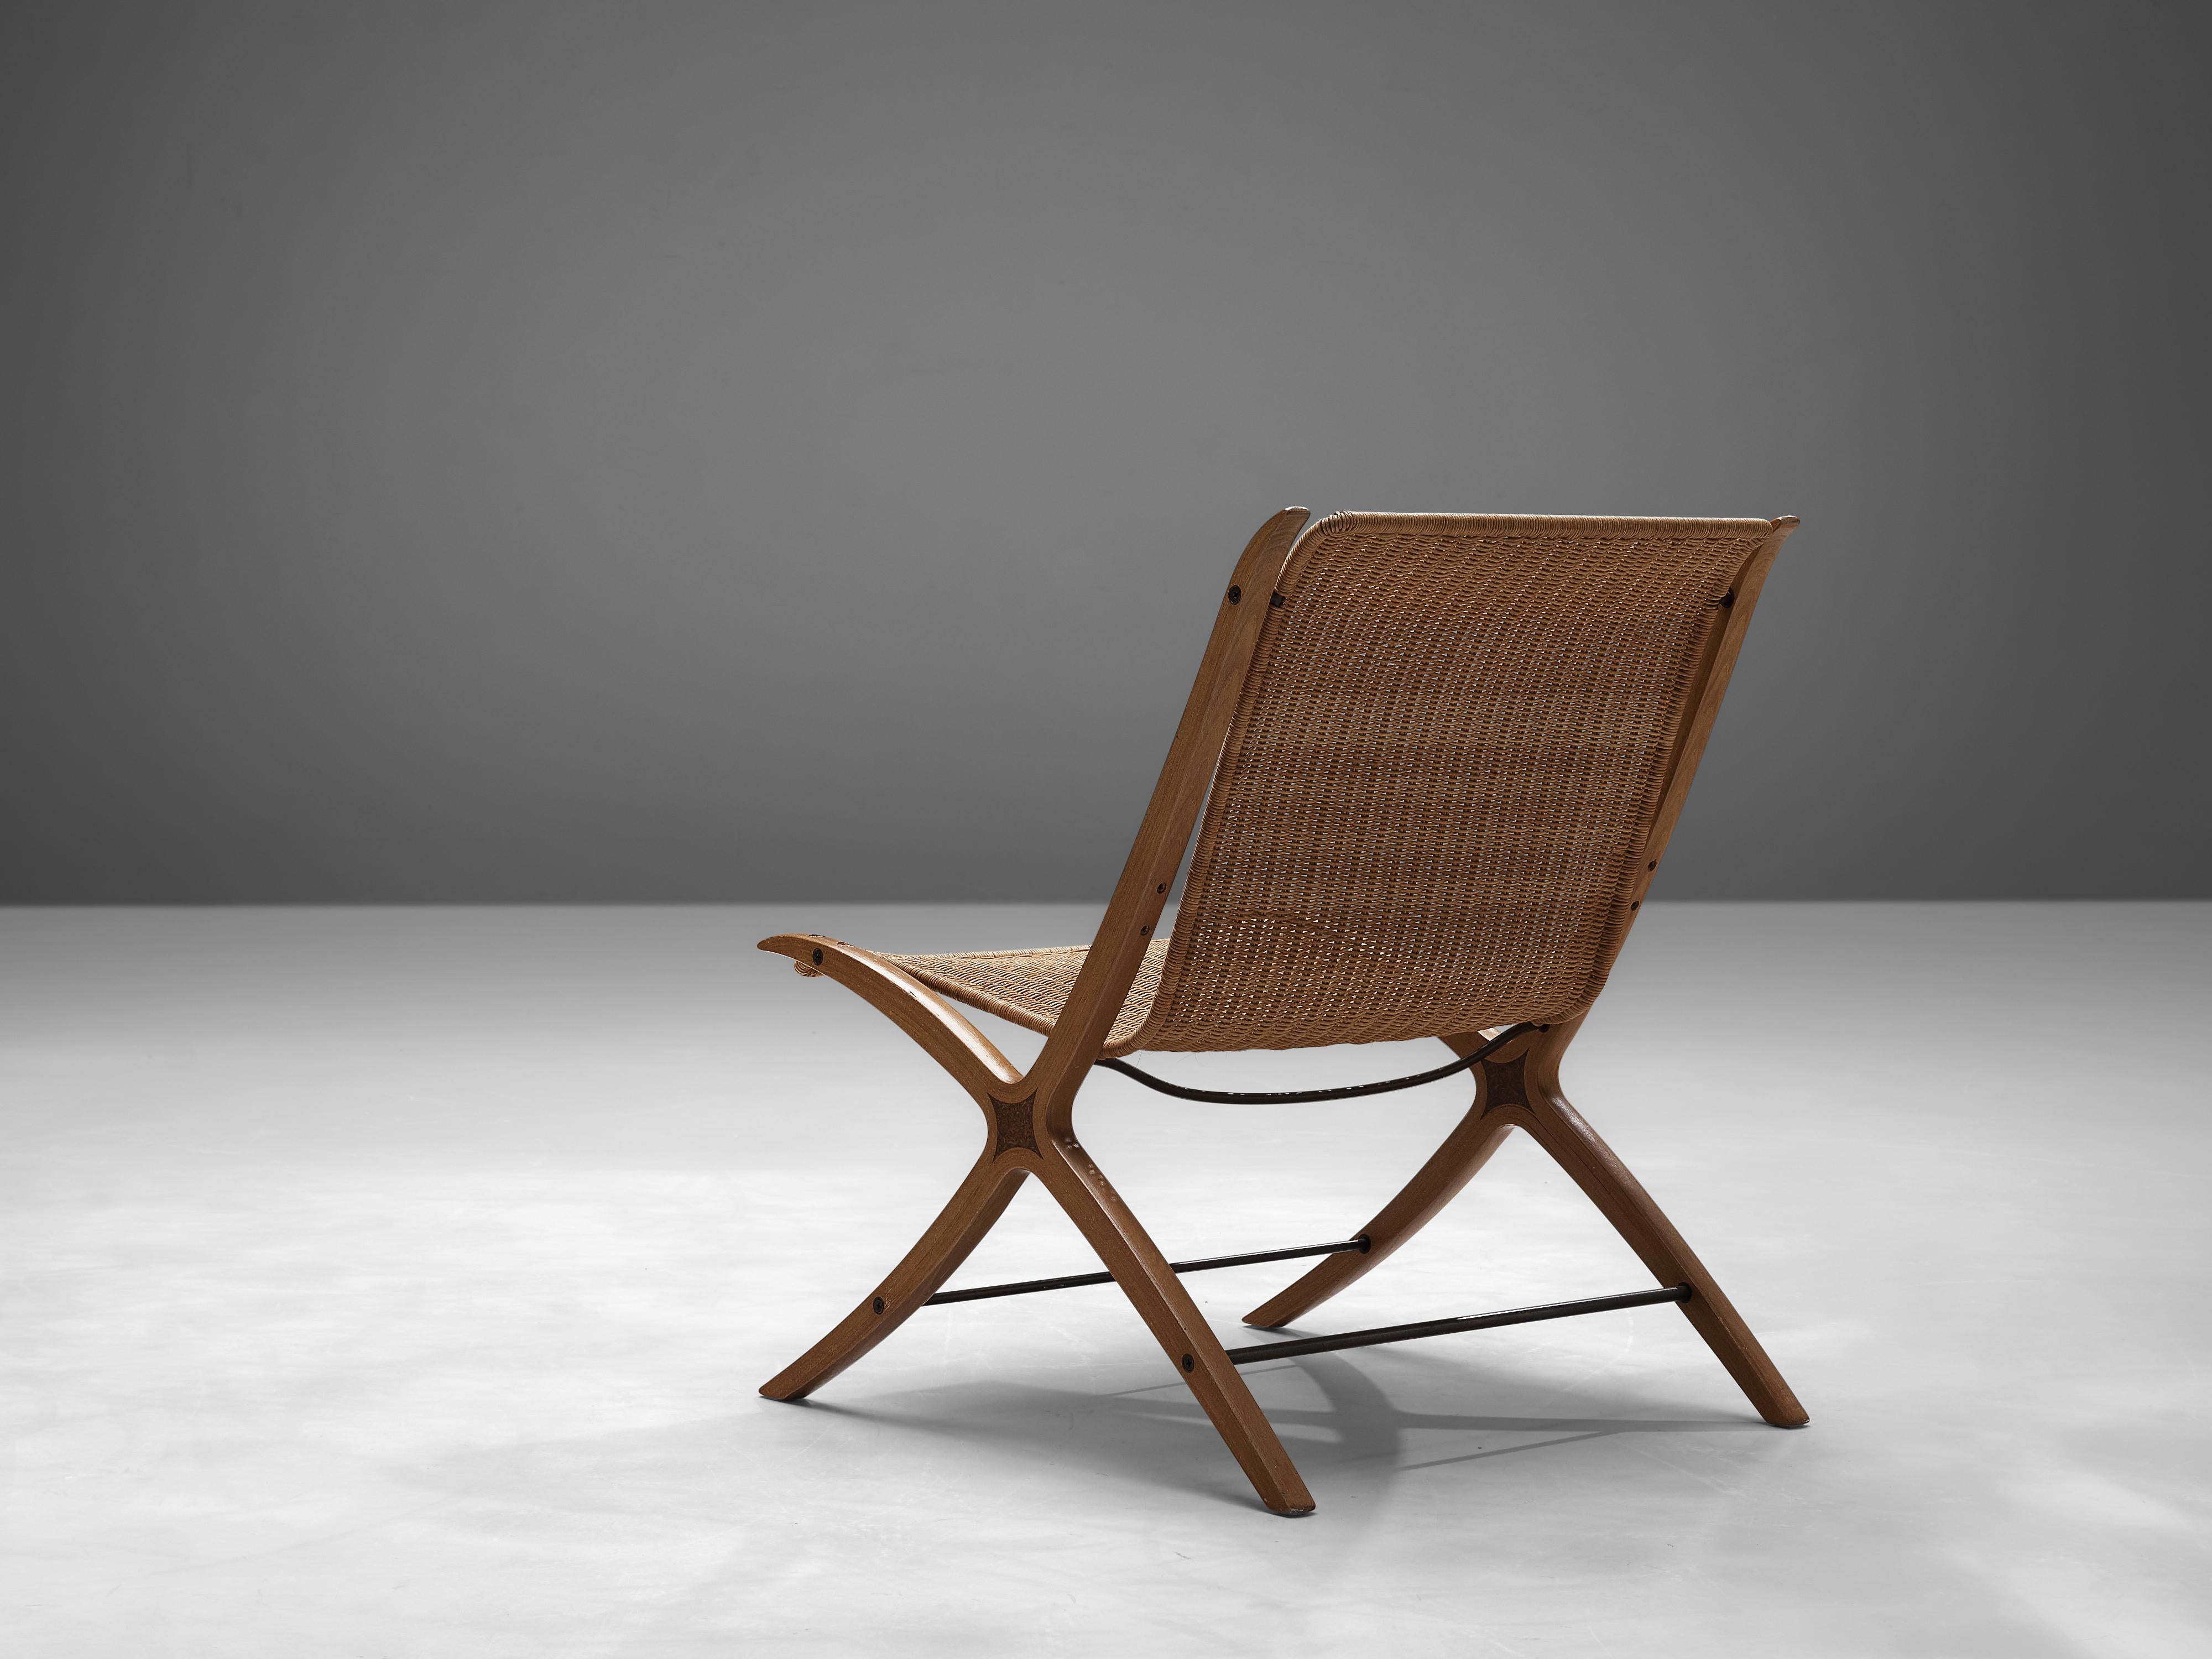 Peter Hvidt & Orla Mølgaard Nielsen for Fritz Hansen, 'X-chair model '6103', cane, maple, mahogany, Denmark, designed in 1958

This chair is for obvious reasons nicknamed the 'X-chair'. The detailing of this X-design runs all the way from the front